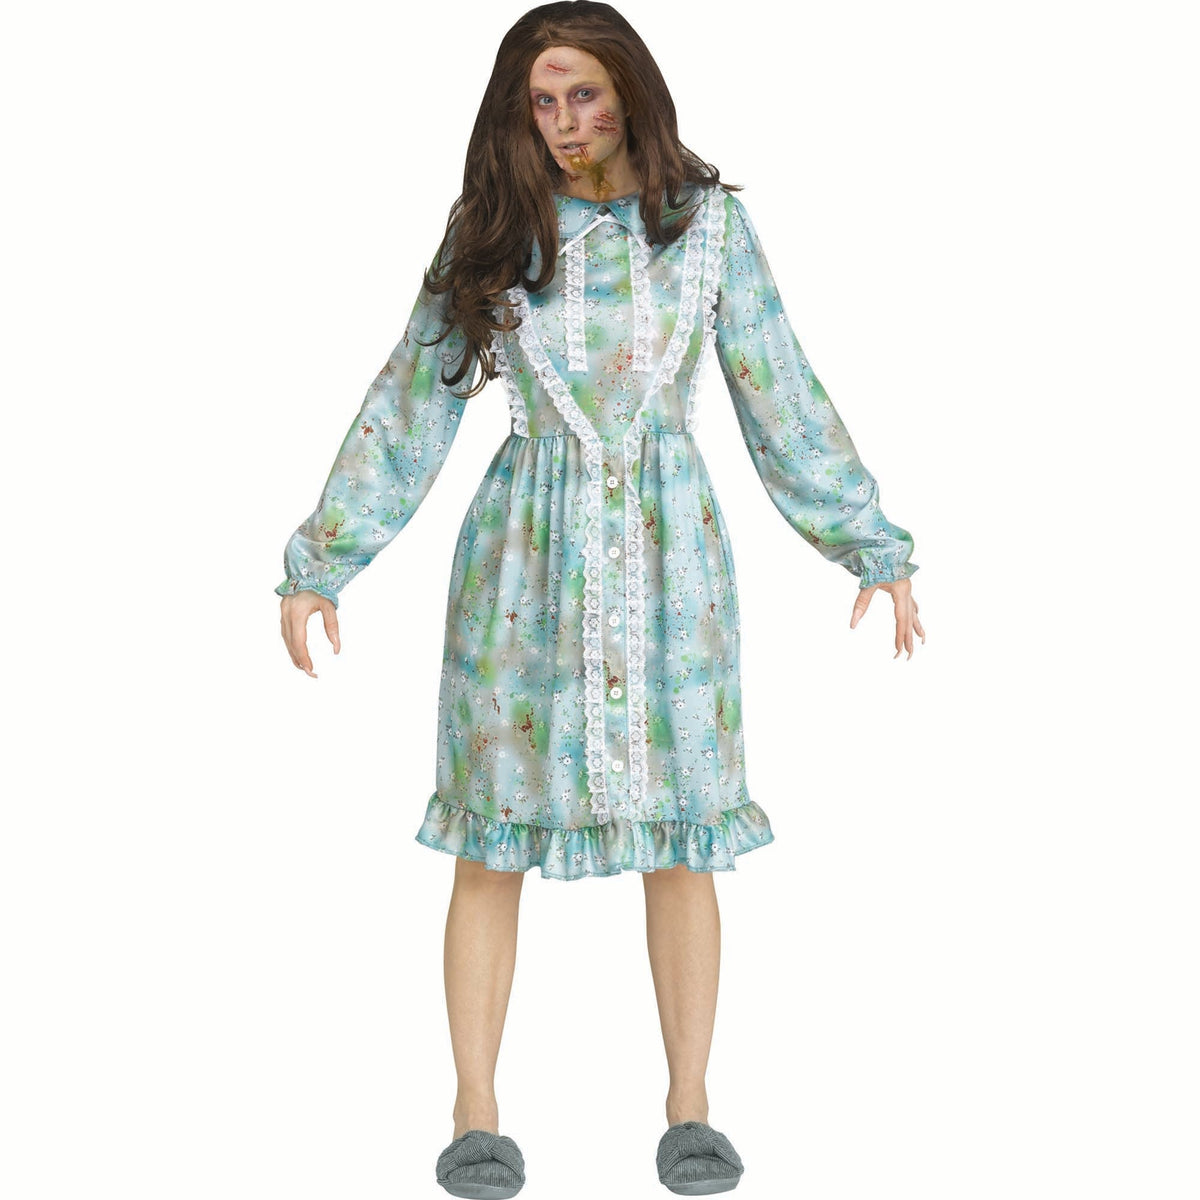 FUN WORLD Costume Accessories Nightmare Nightgown Dress for Adults, Bloody Blue & Green Dress